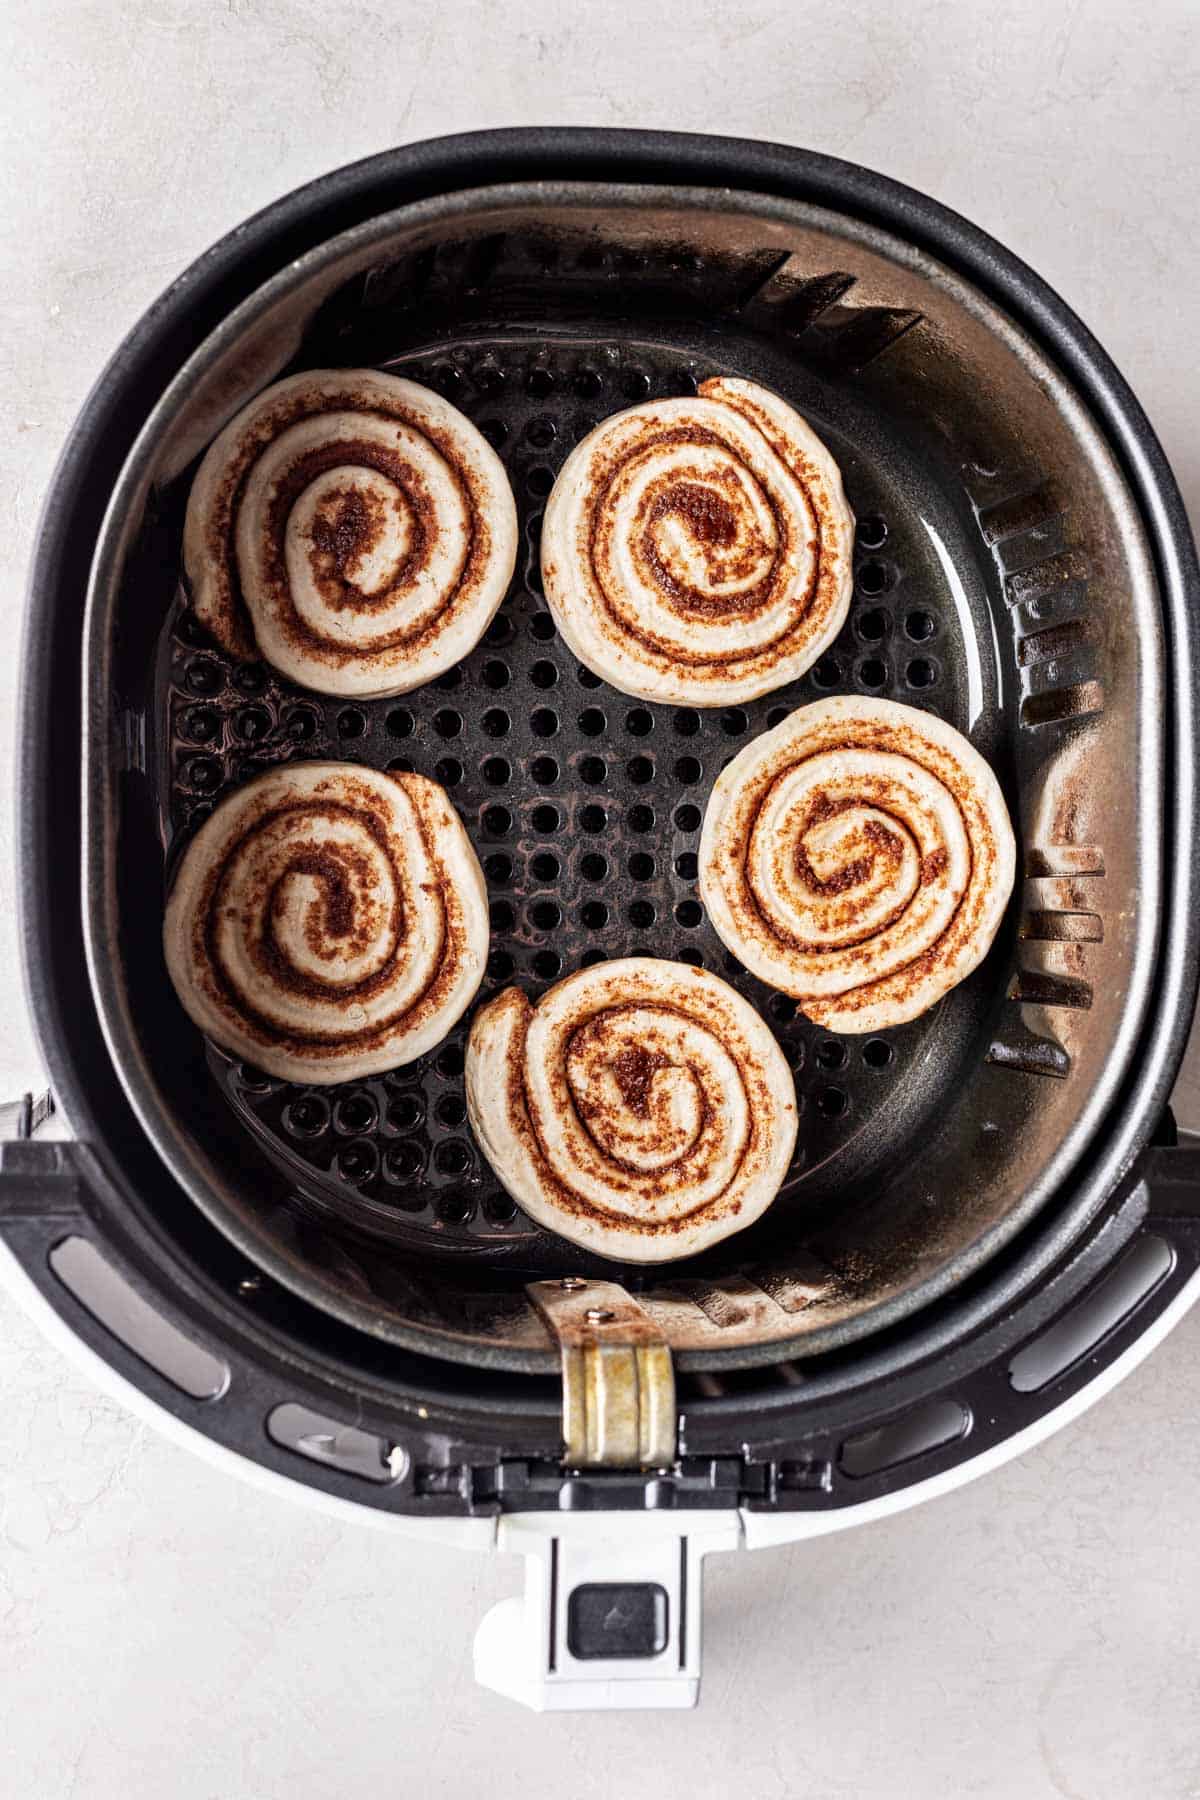 Air fryer basket with 5 cinnamon rolls in the bottom.